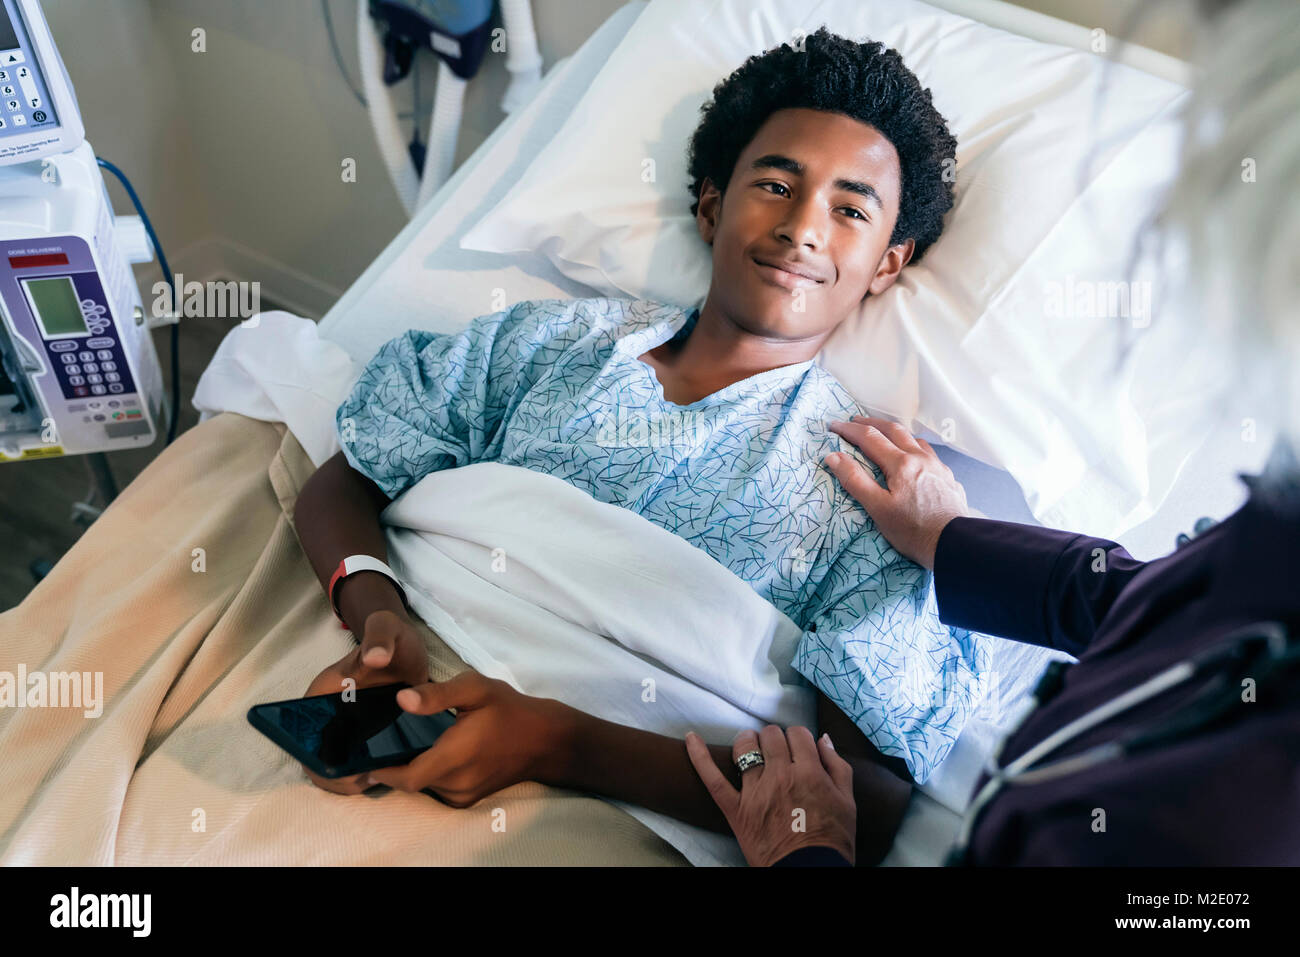 Doctor comforting boy laying in hospital bed holding cell phone Stock Photo